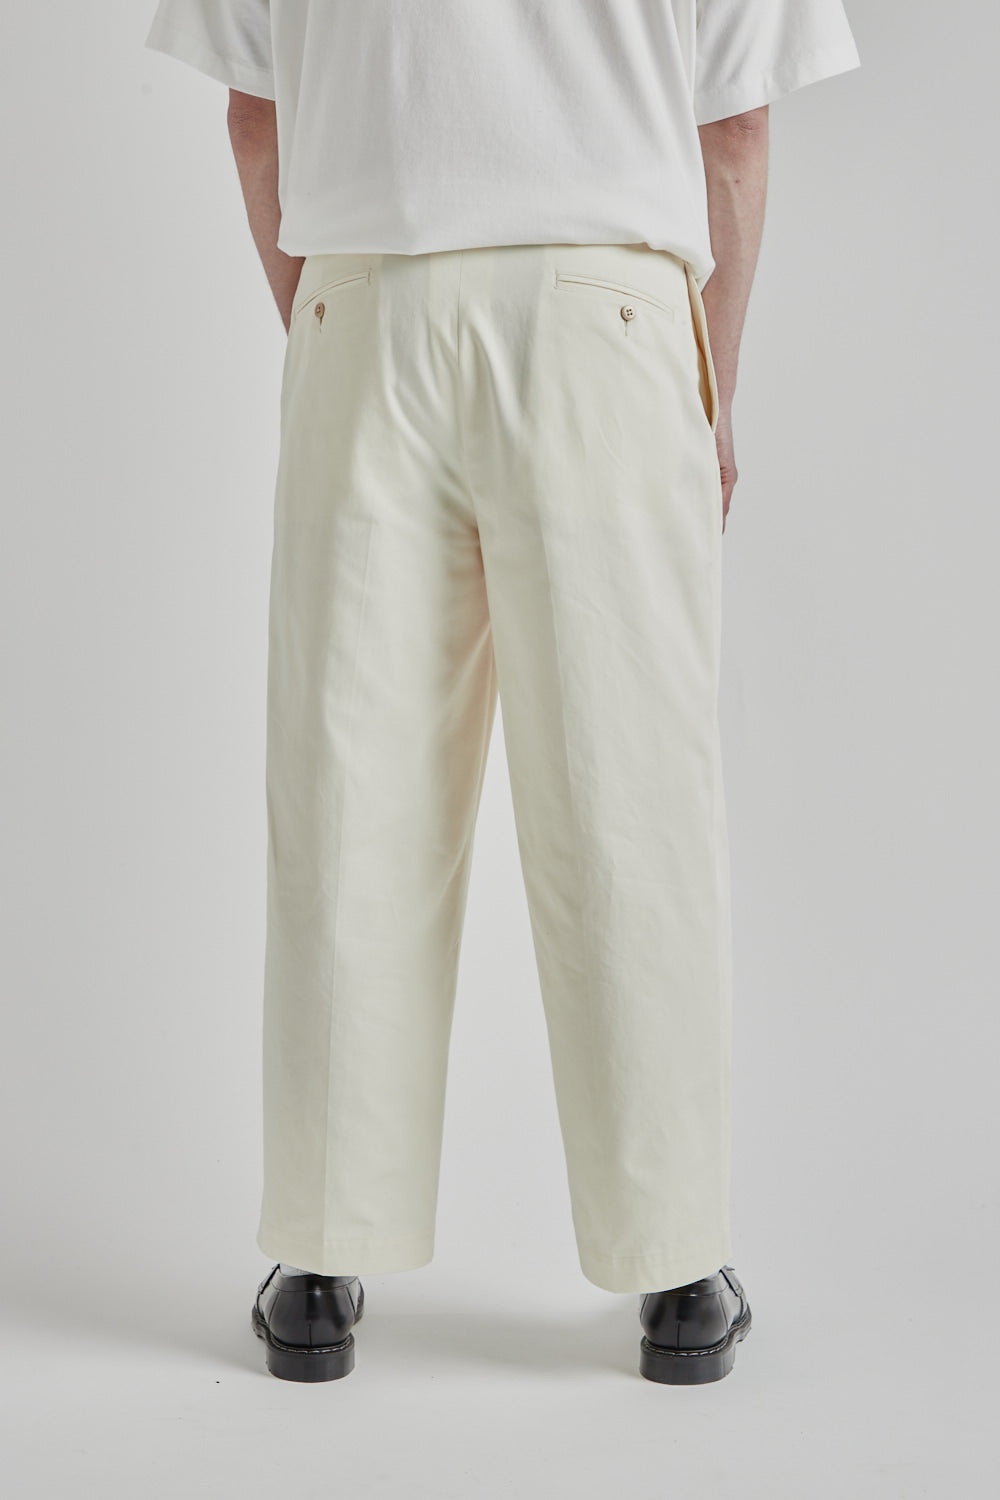 Blurhms 2046D Chino Pants in Ivory